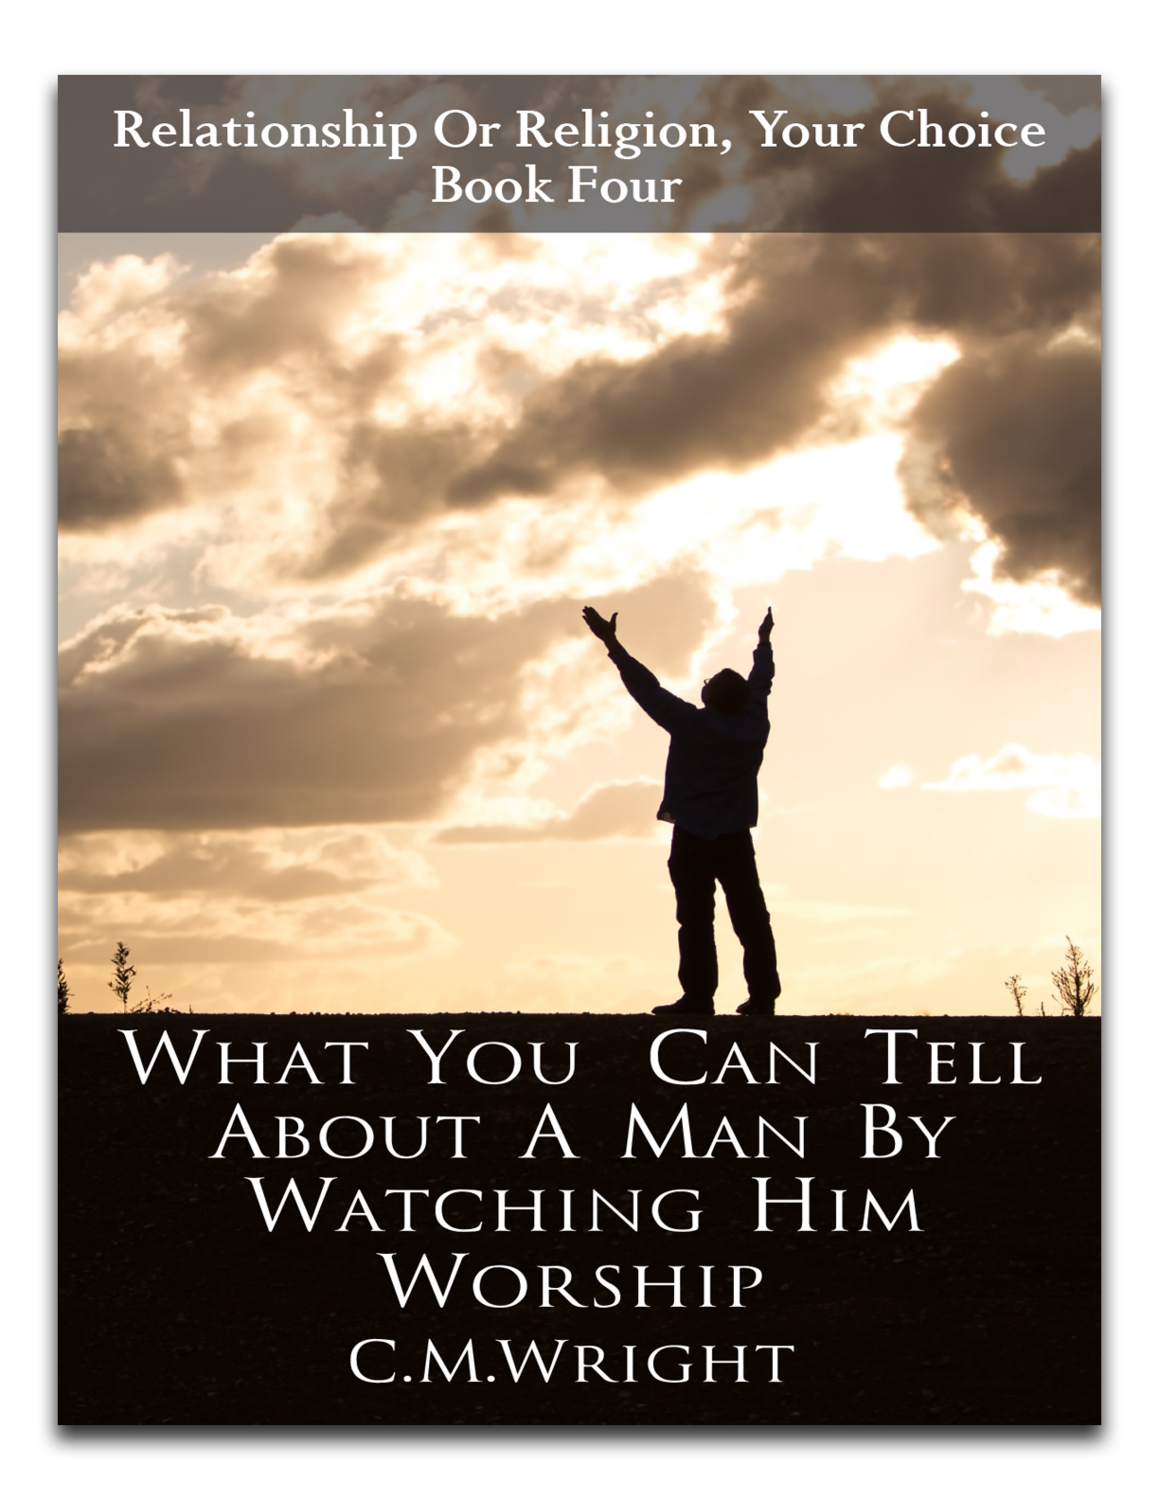 What You Can Tell About A Man By Watching Him Worship by C.M. Wright